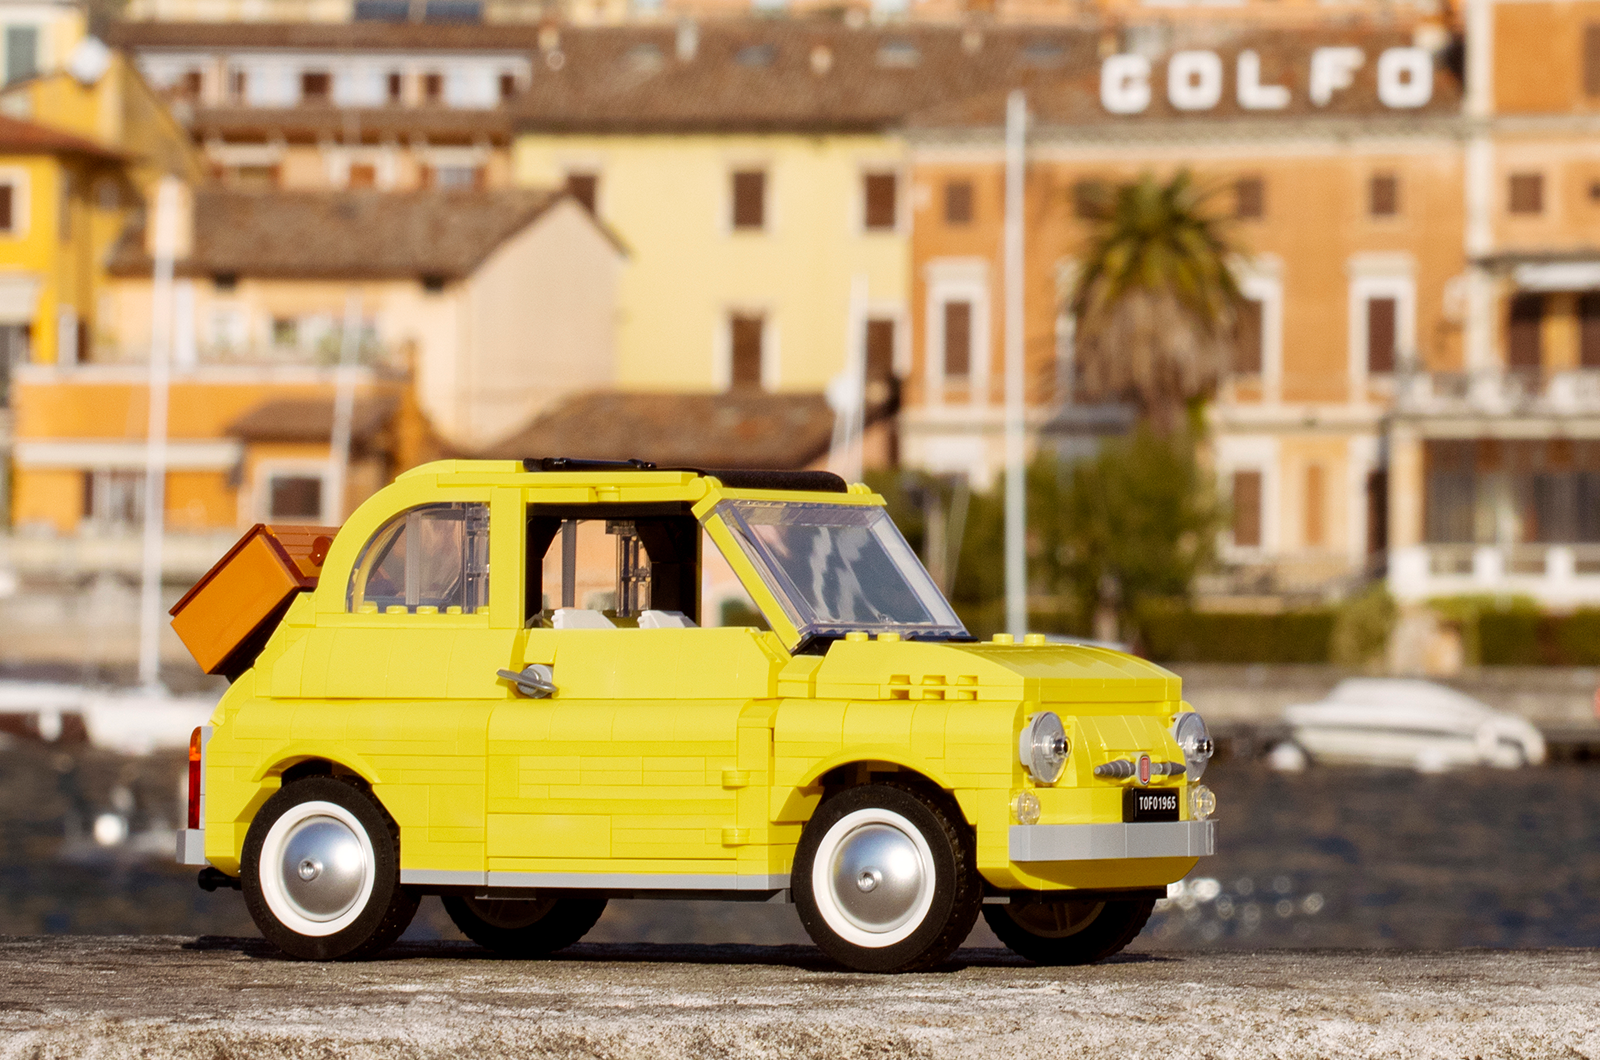 Classic & Sports Car – Lego’s done it again – this time with a classic Fiat 500